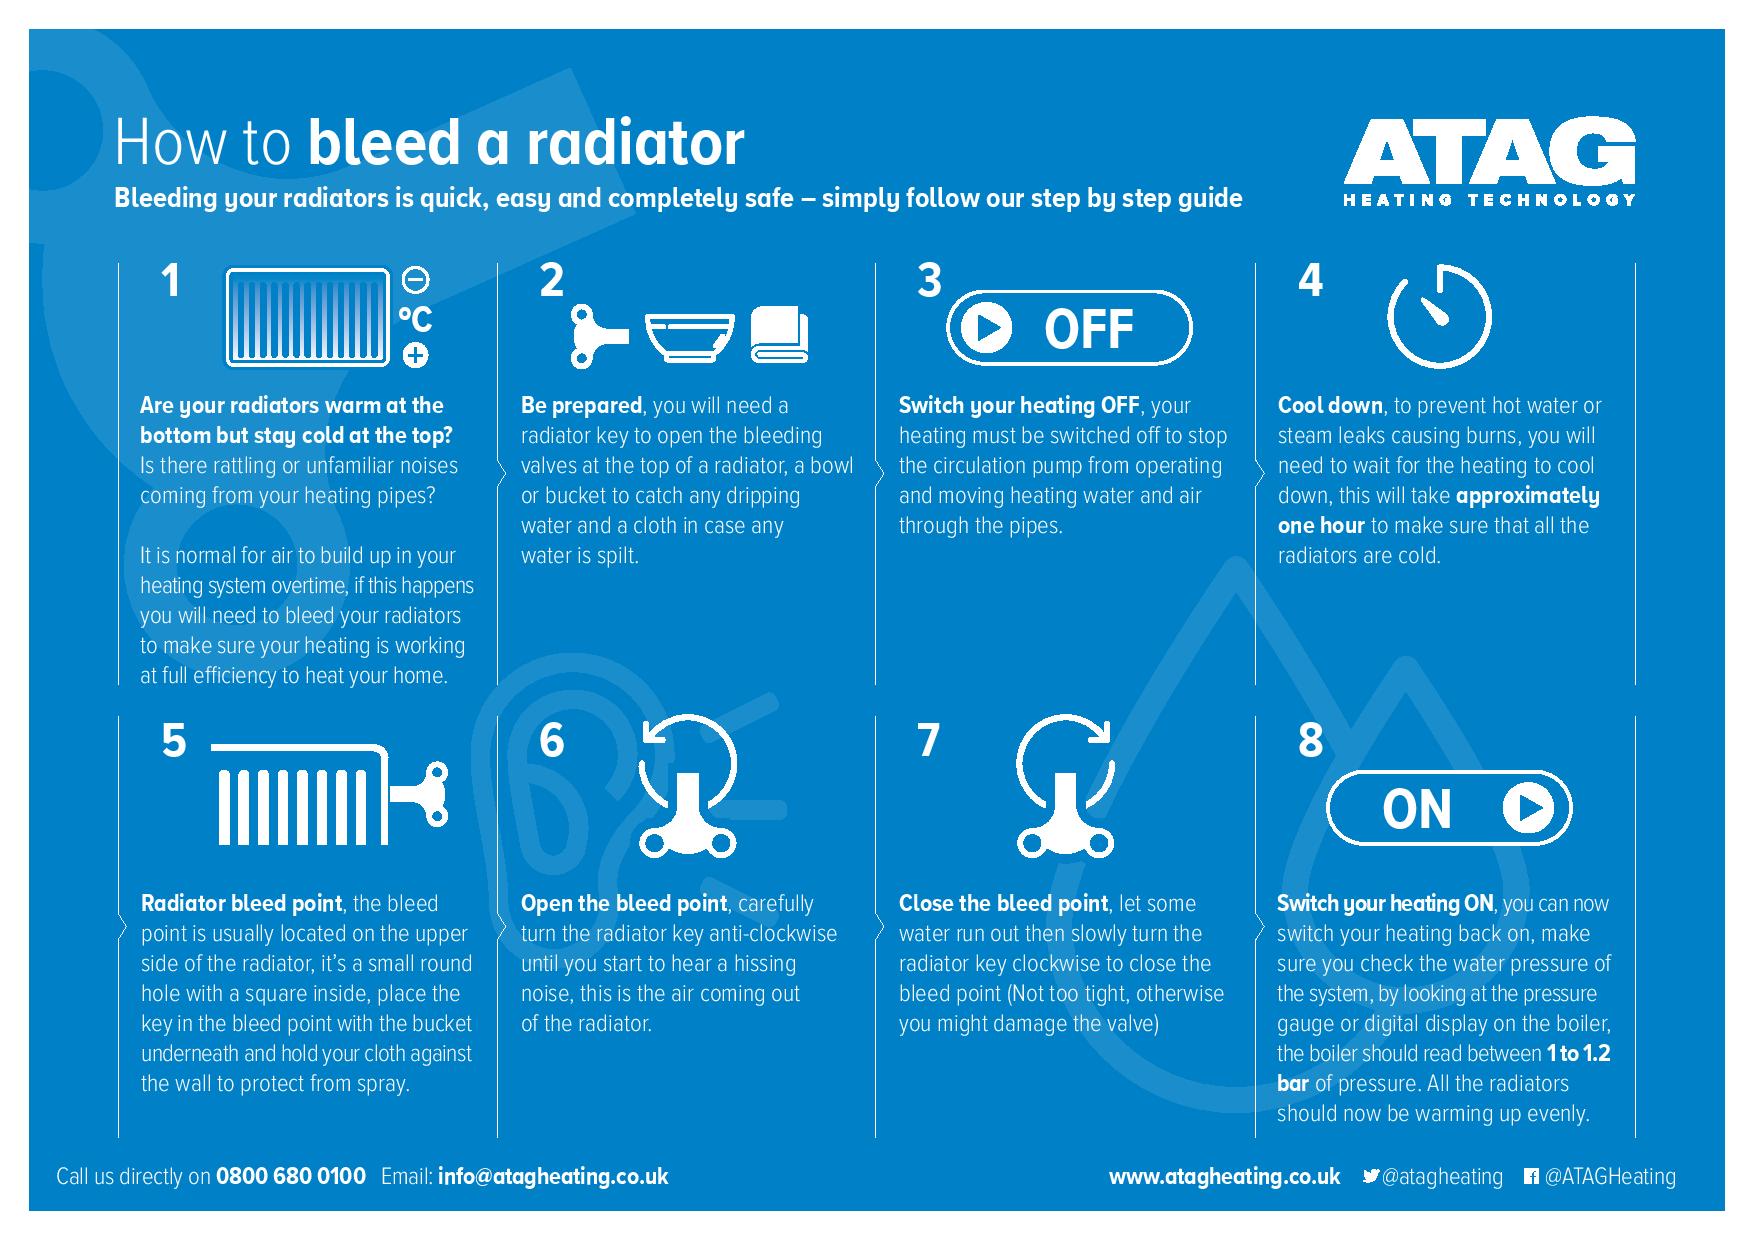 ATAG - How to bleed a radiator infographic-page-001